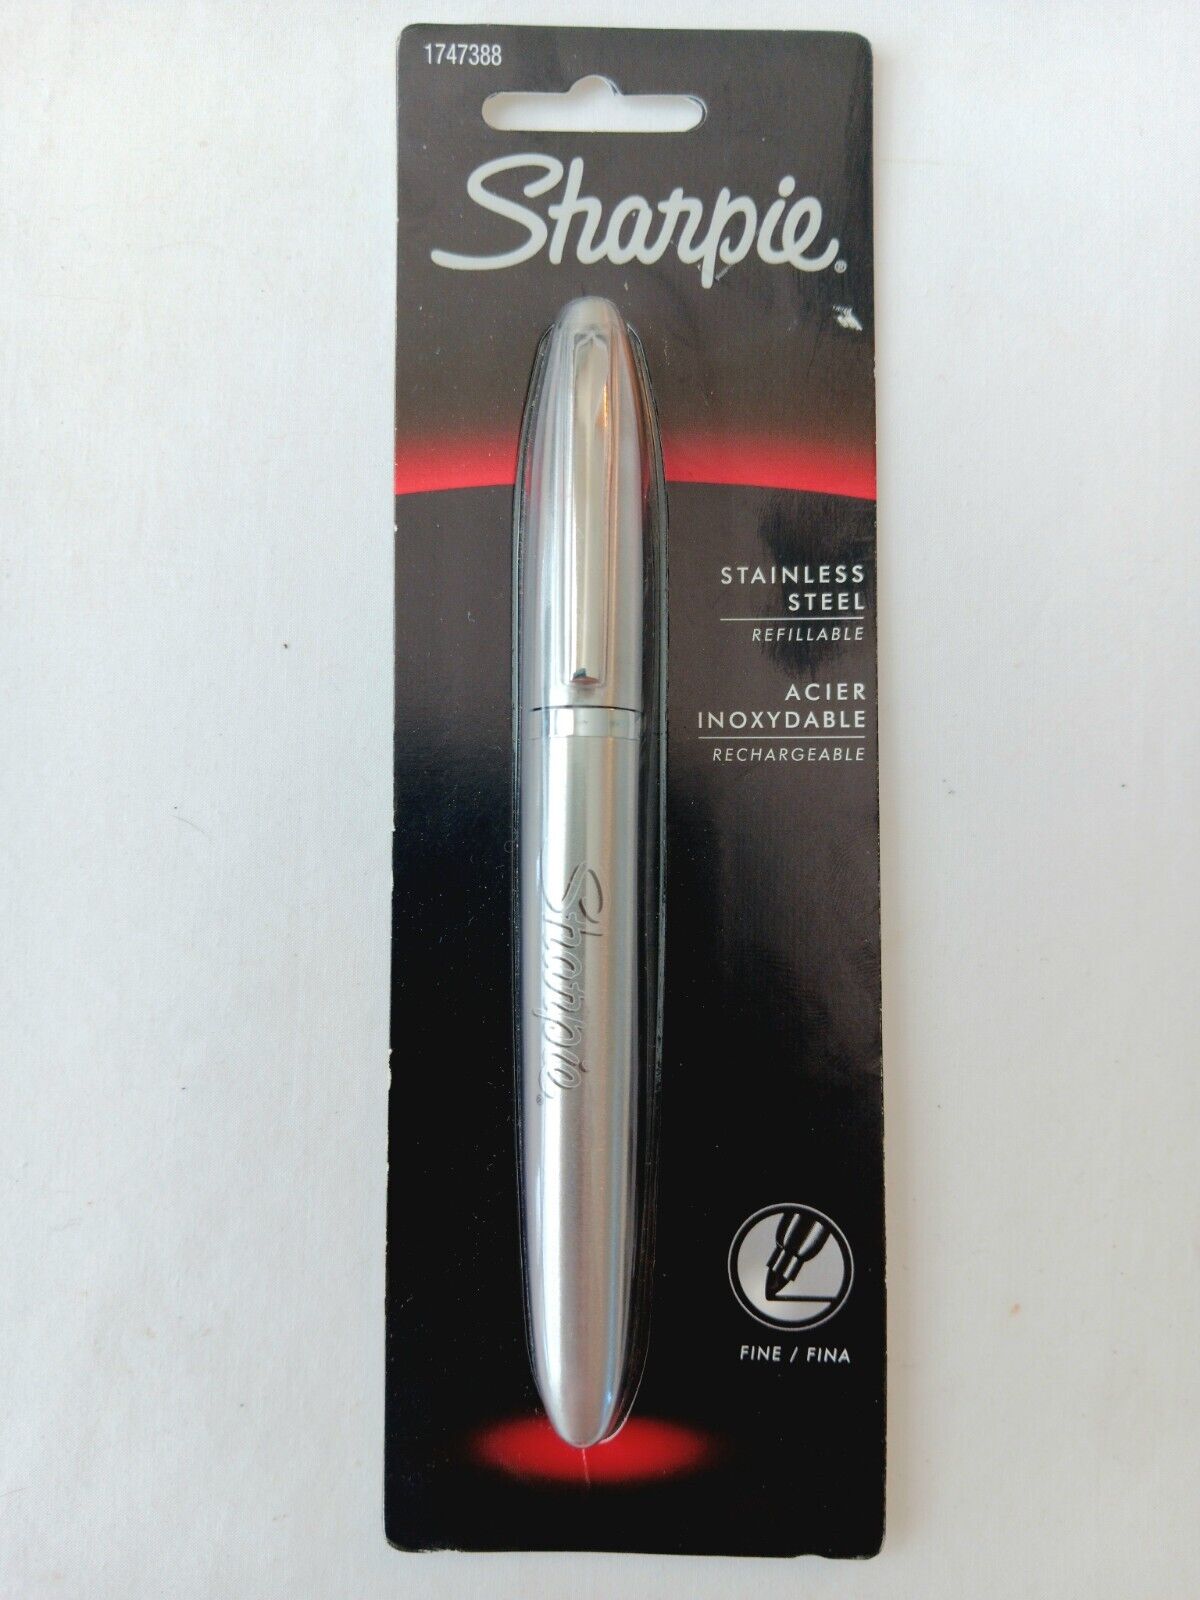 Vintag SHARPIE 1747388 Stainless Steel Fine Point Permanent Marker Rechargeable 